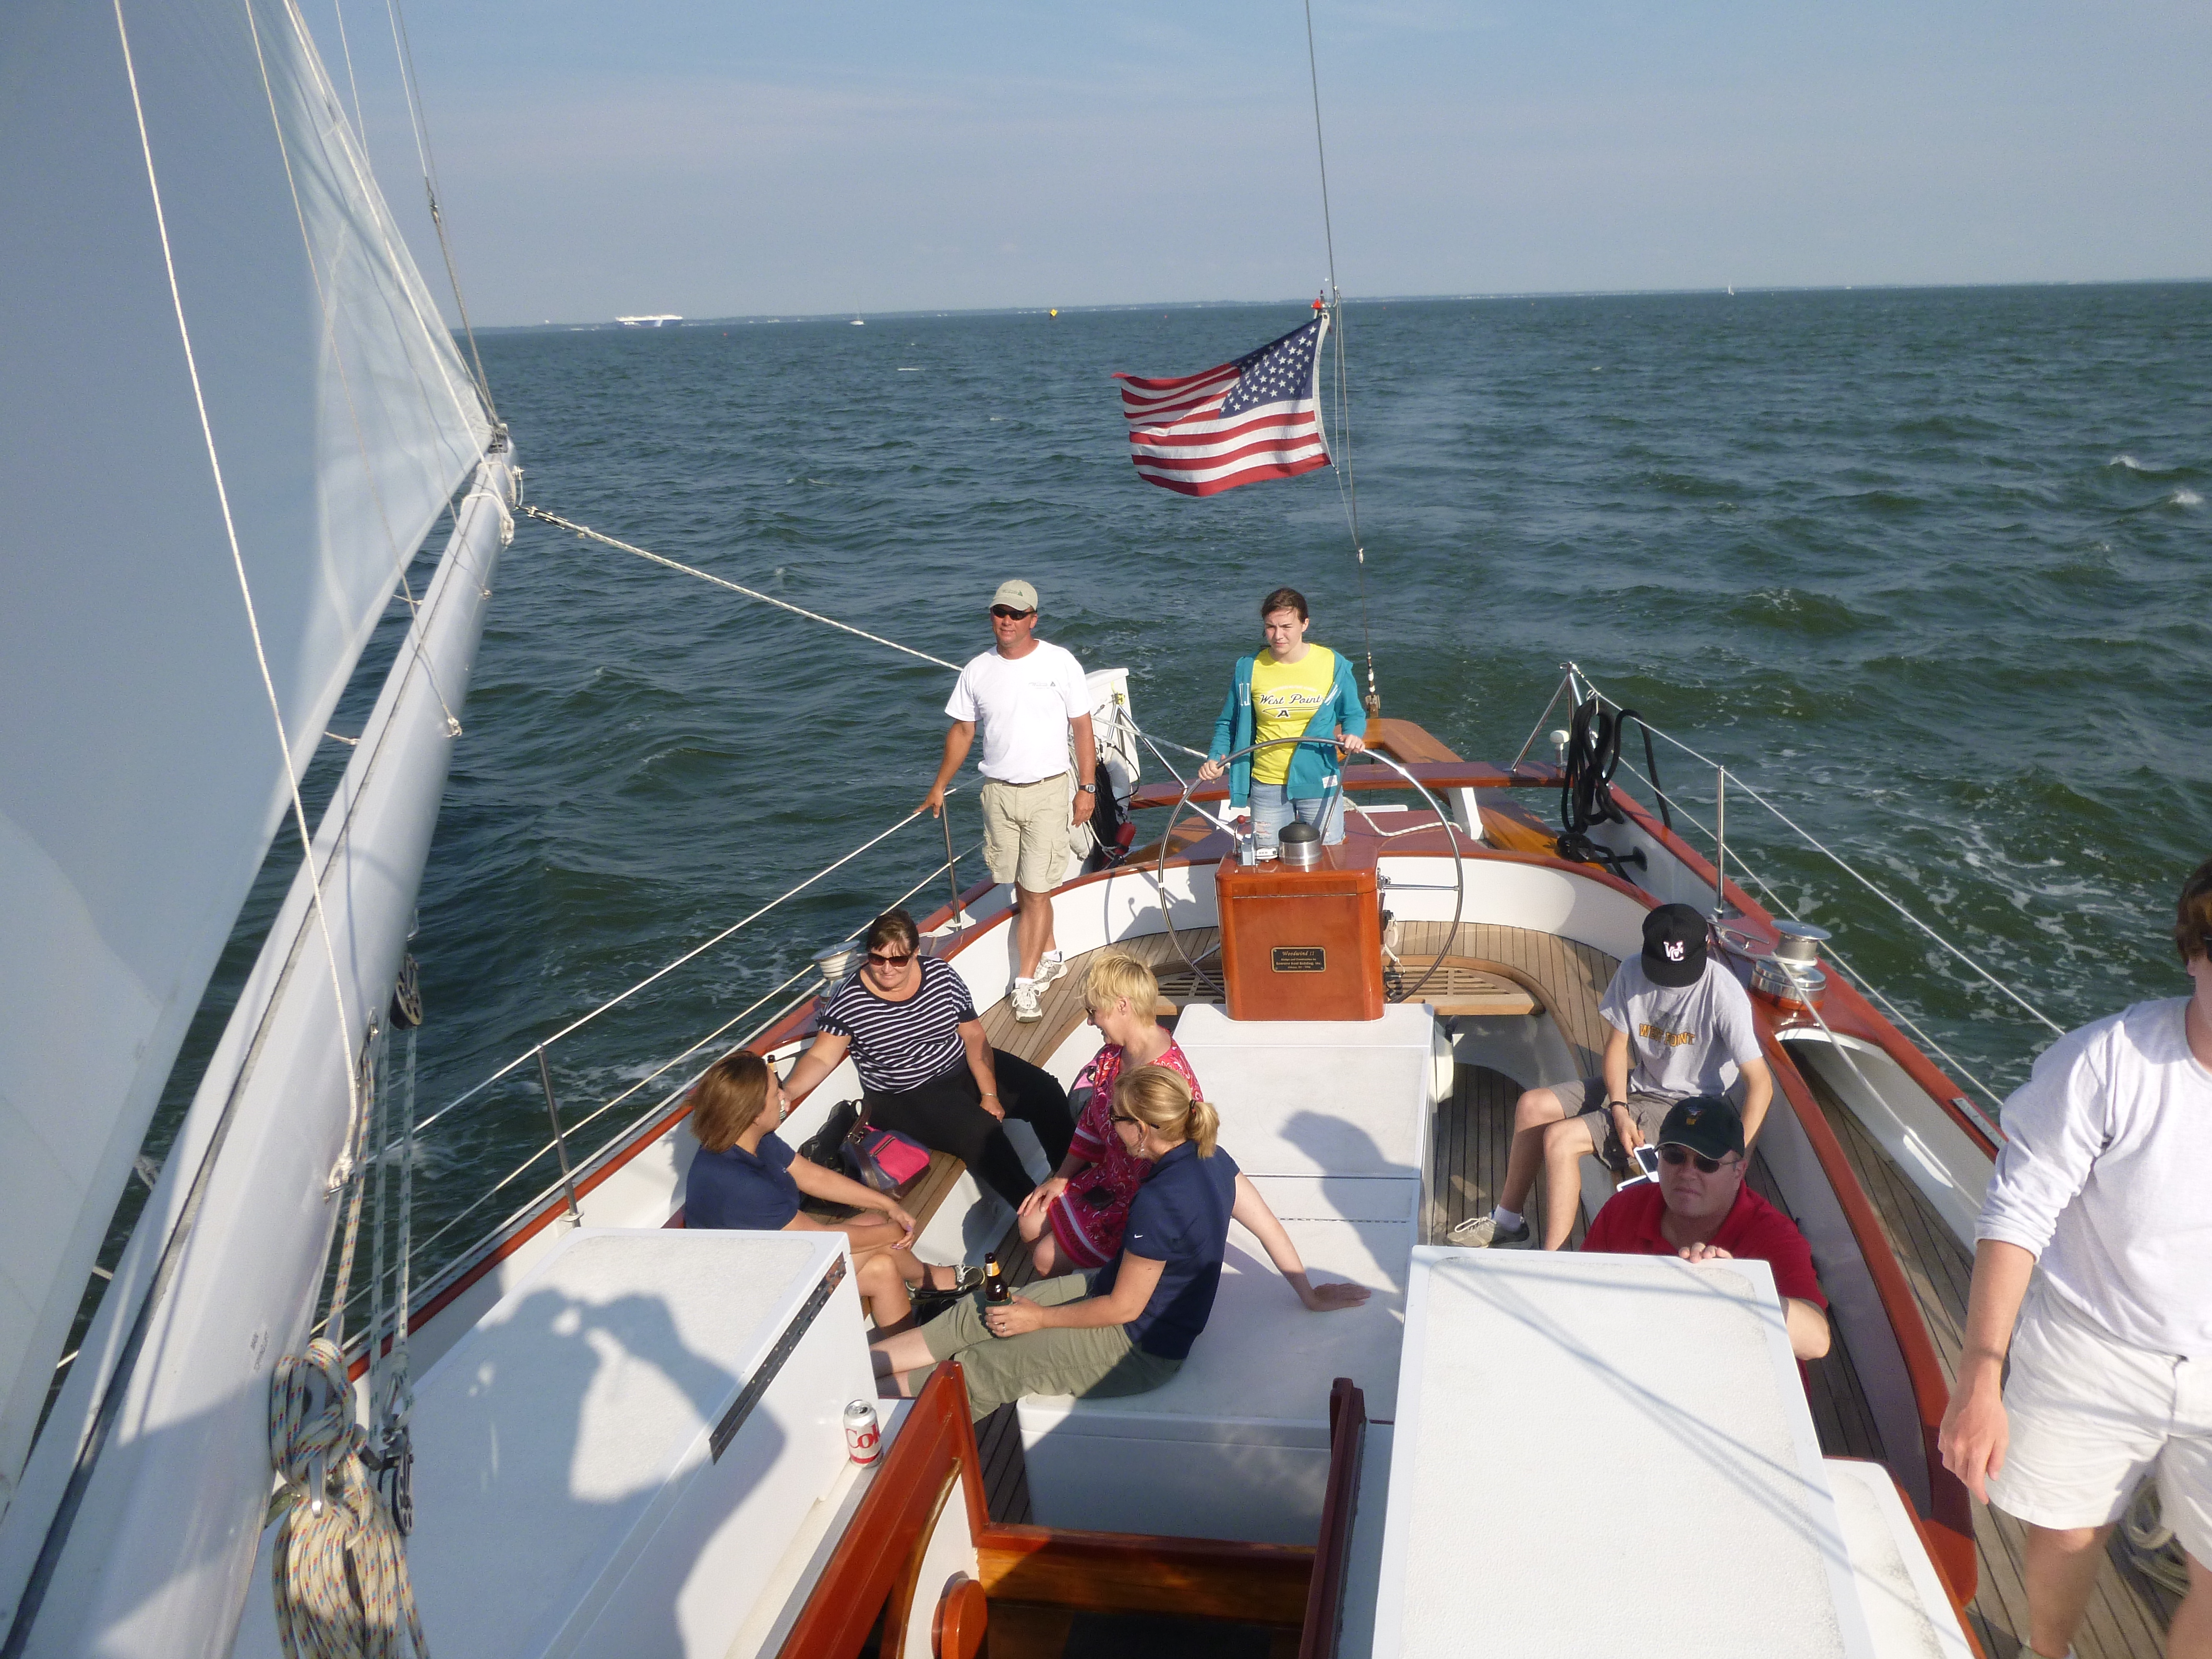 Great day of sailing on the Schooner Woodwind II